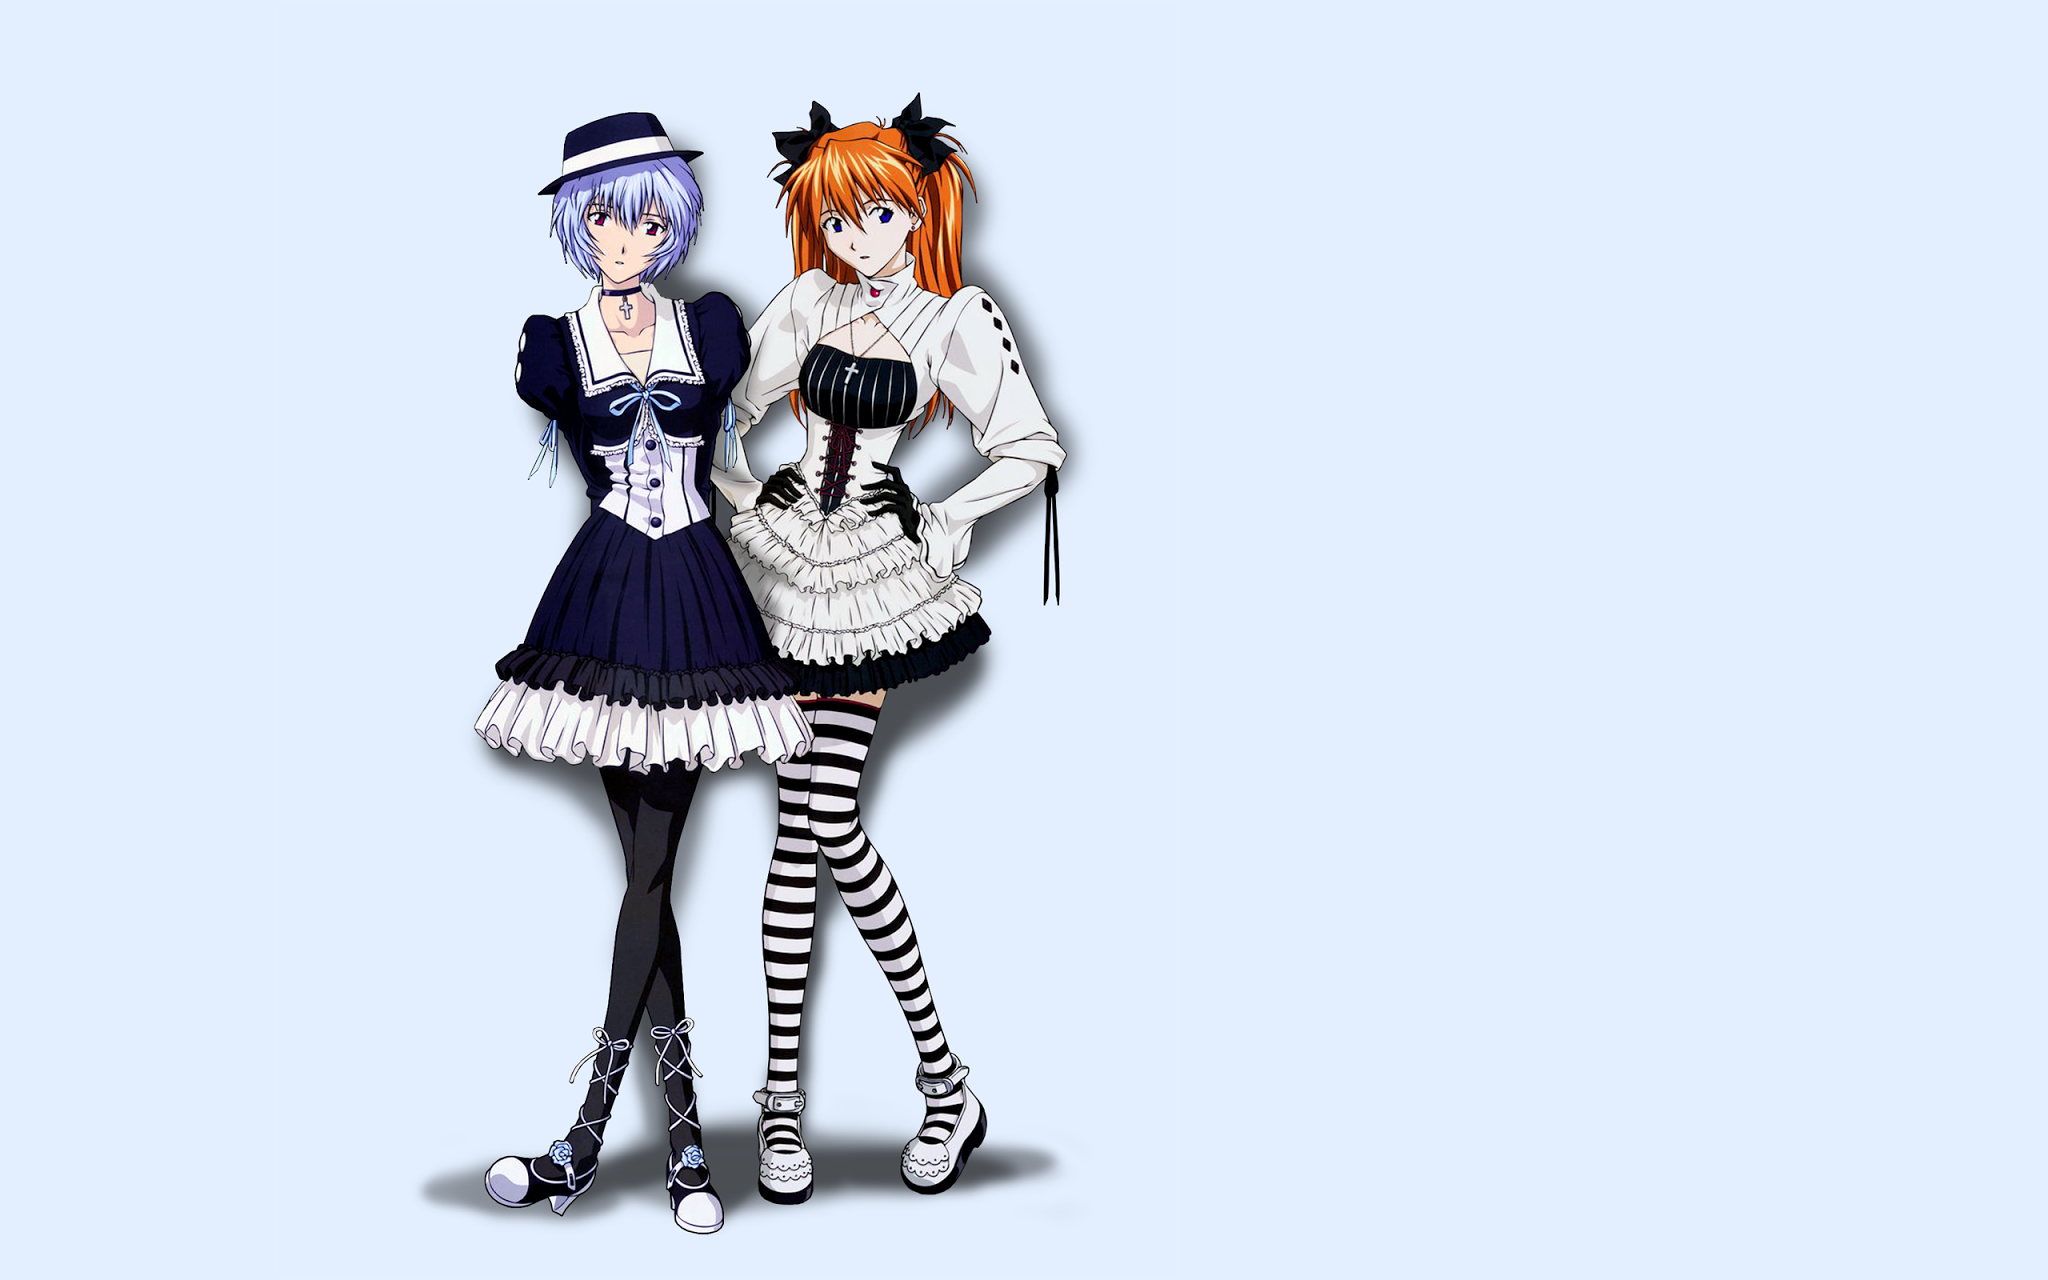 Anime 2048x1280 anime Neon Genesis Evangelion Asuka Langley Soryu Ayanami Rei anime girls simple background two women stockings striped stockings hat women with hats dress hands on hips